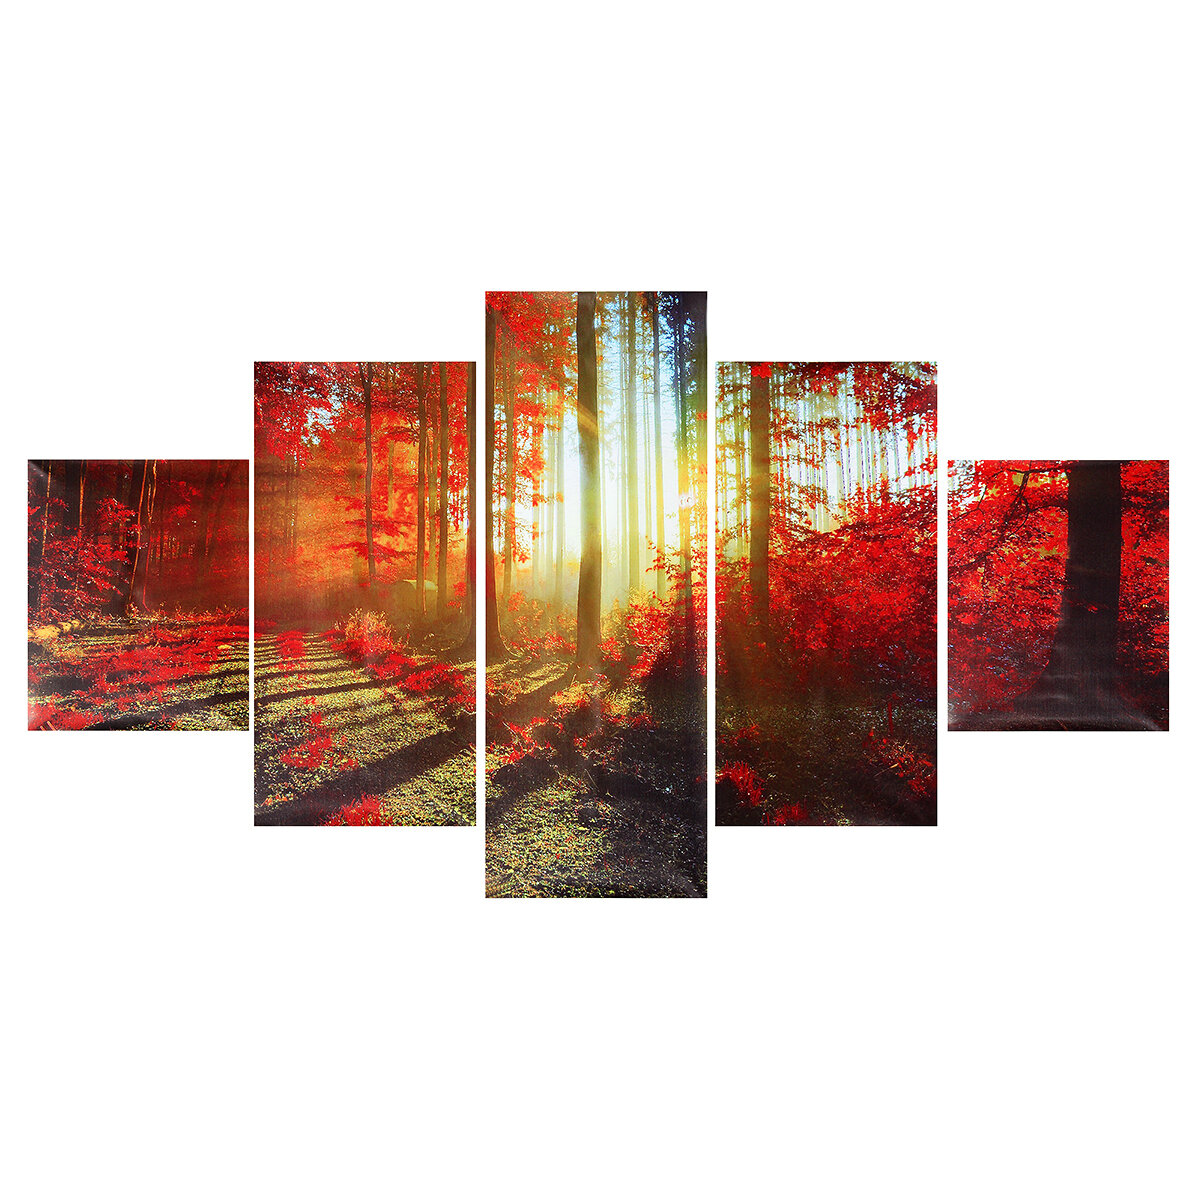 

5Pcs Wall Decorative Paintings Scenery Canvas Print Art Pictures Frameless Wall Hanging Decorations for Home Office